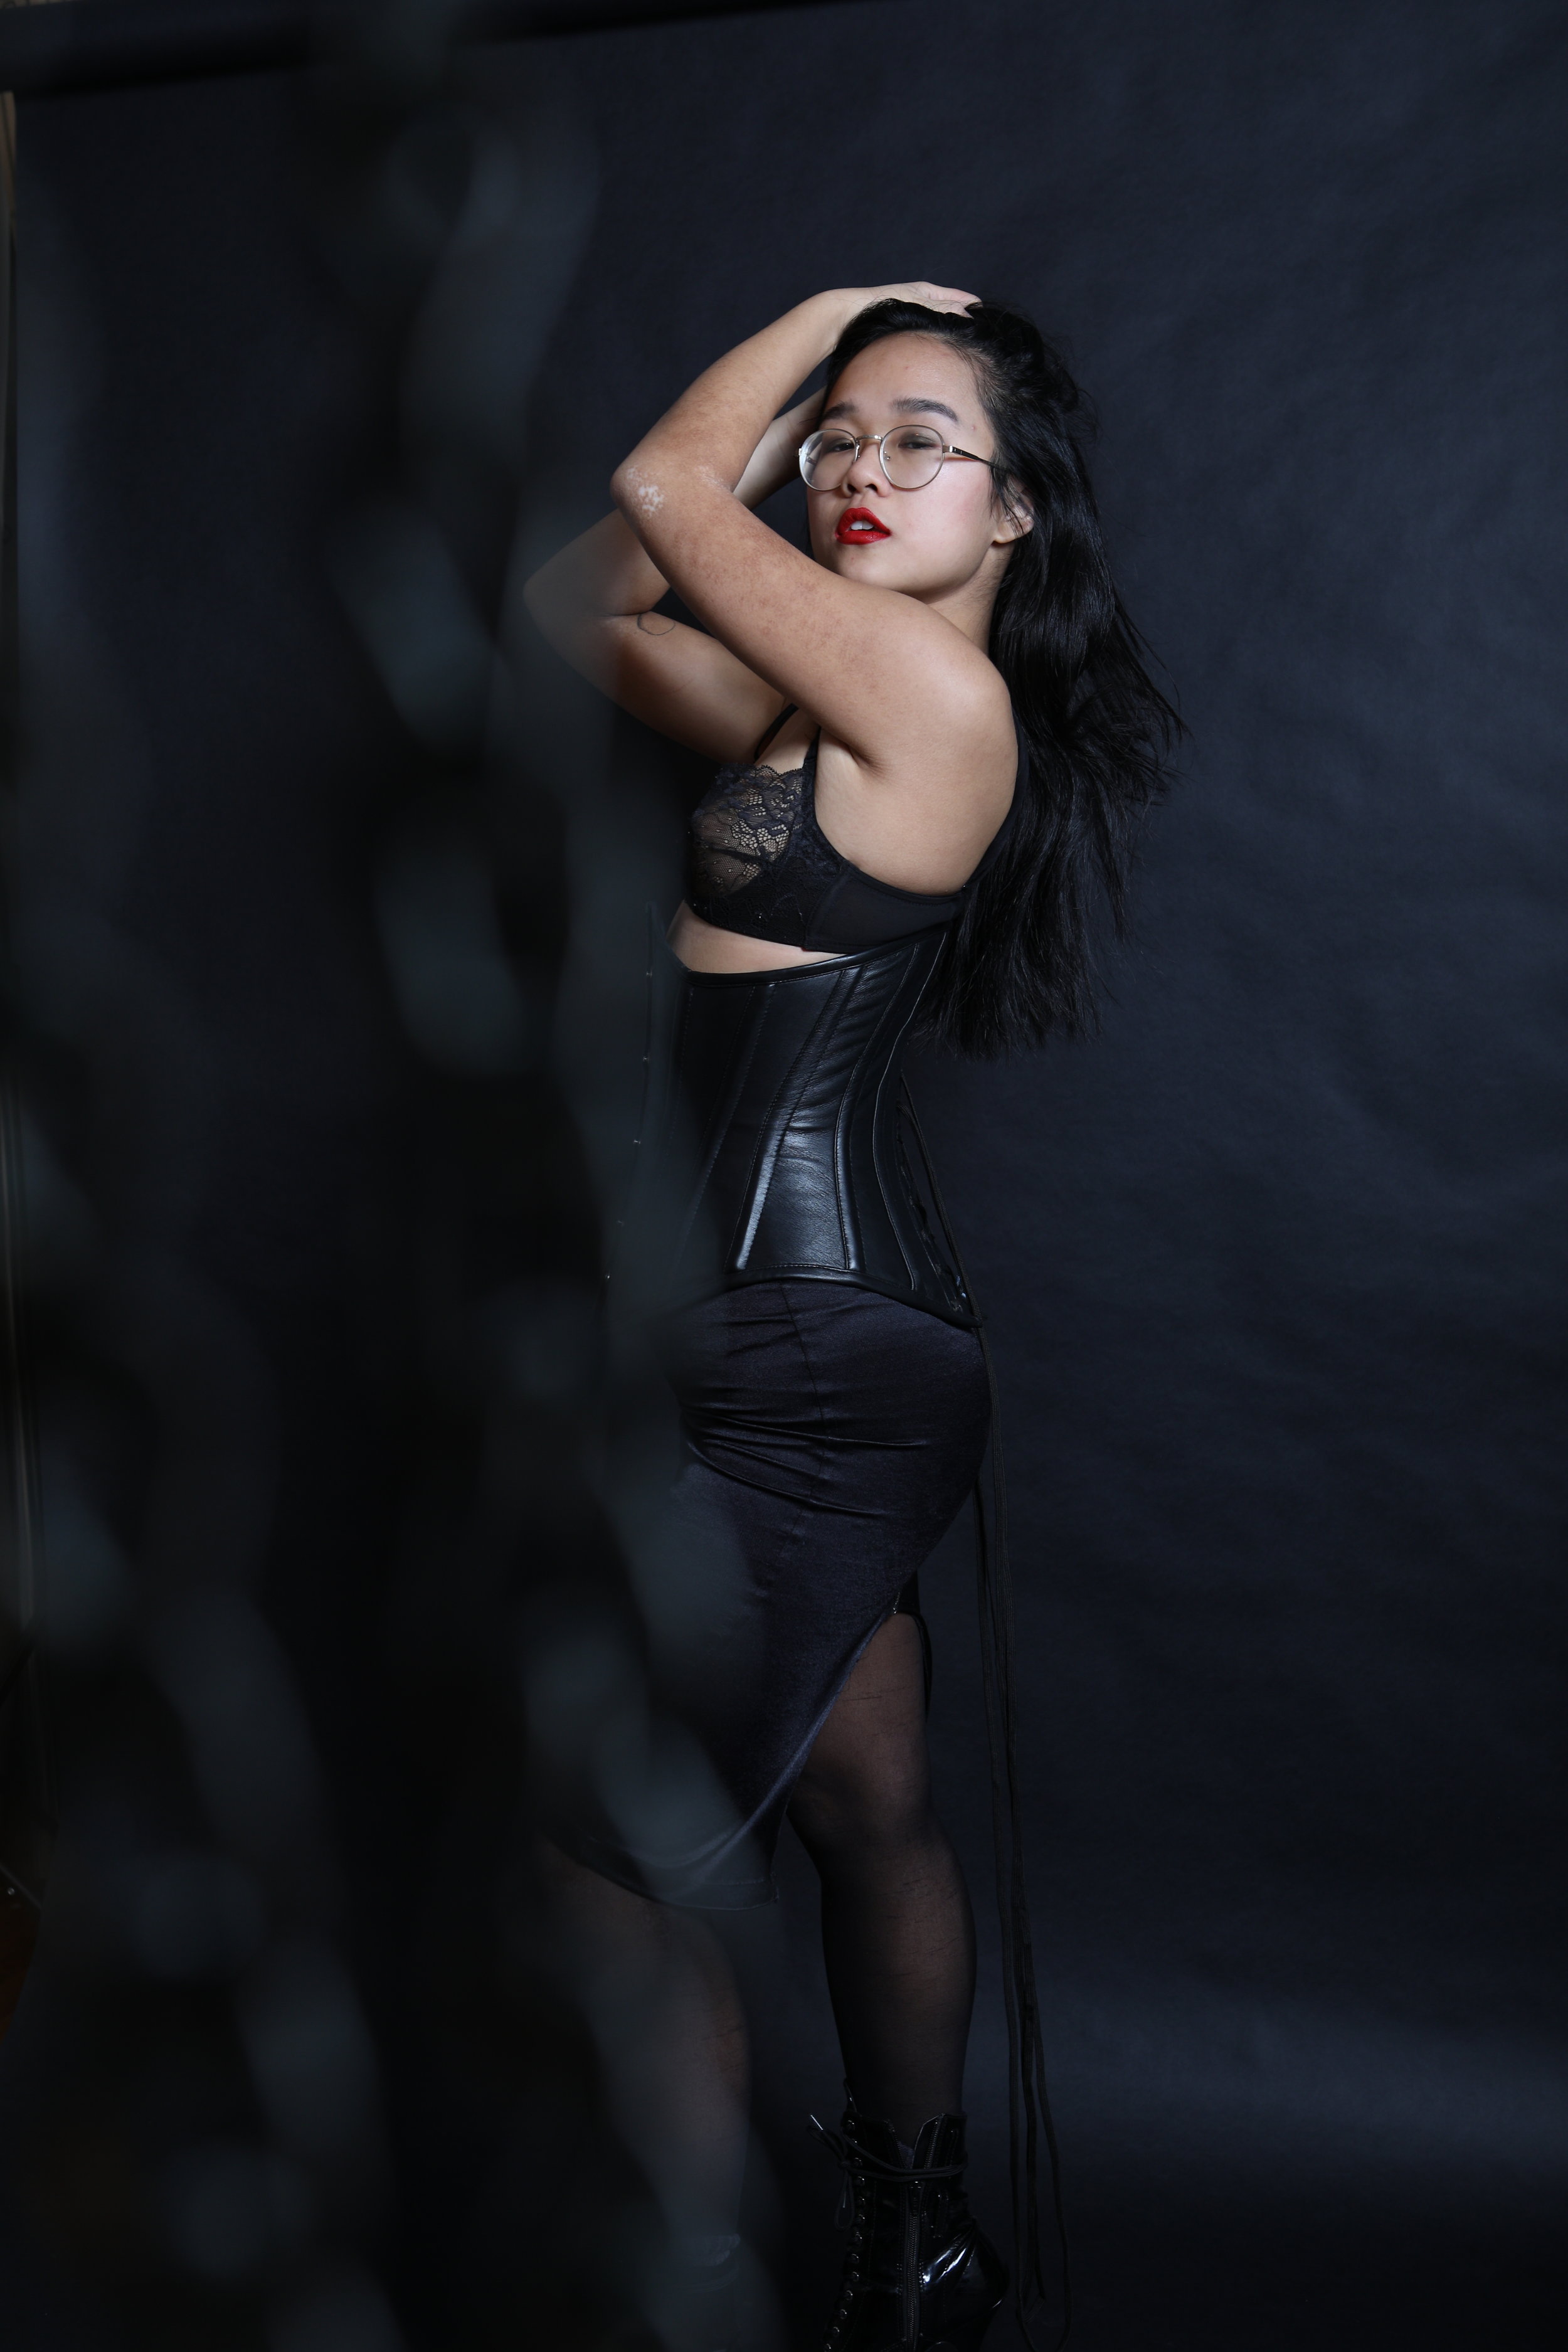 Chinese New York dominatrix and fetish lover Empress Wu lifts up her hair to reveal her outfit of lace lingerie, black leather corset, nylon stockings, and black vinyl boots.